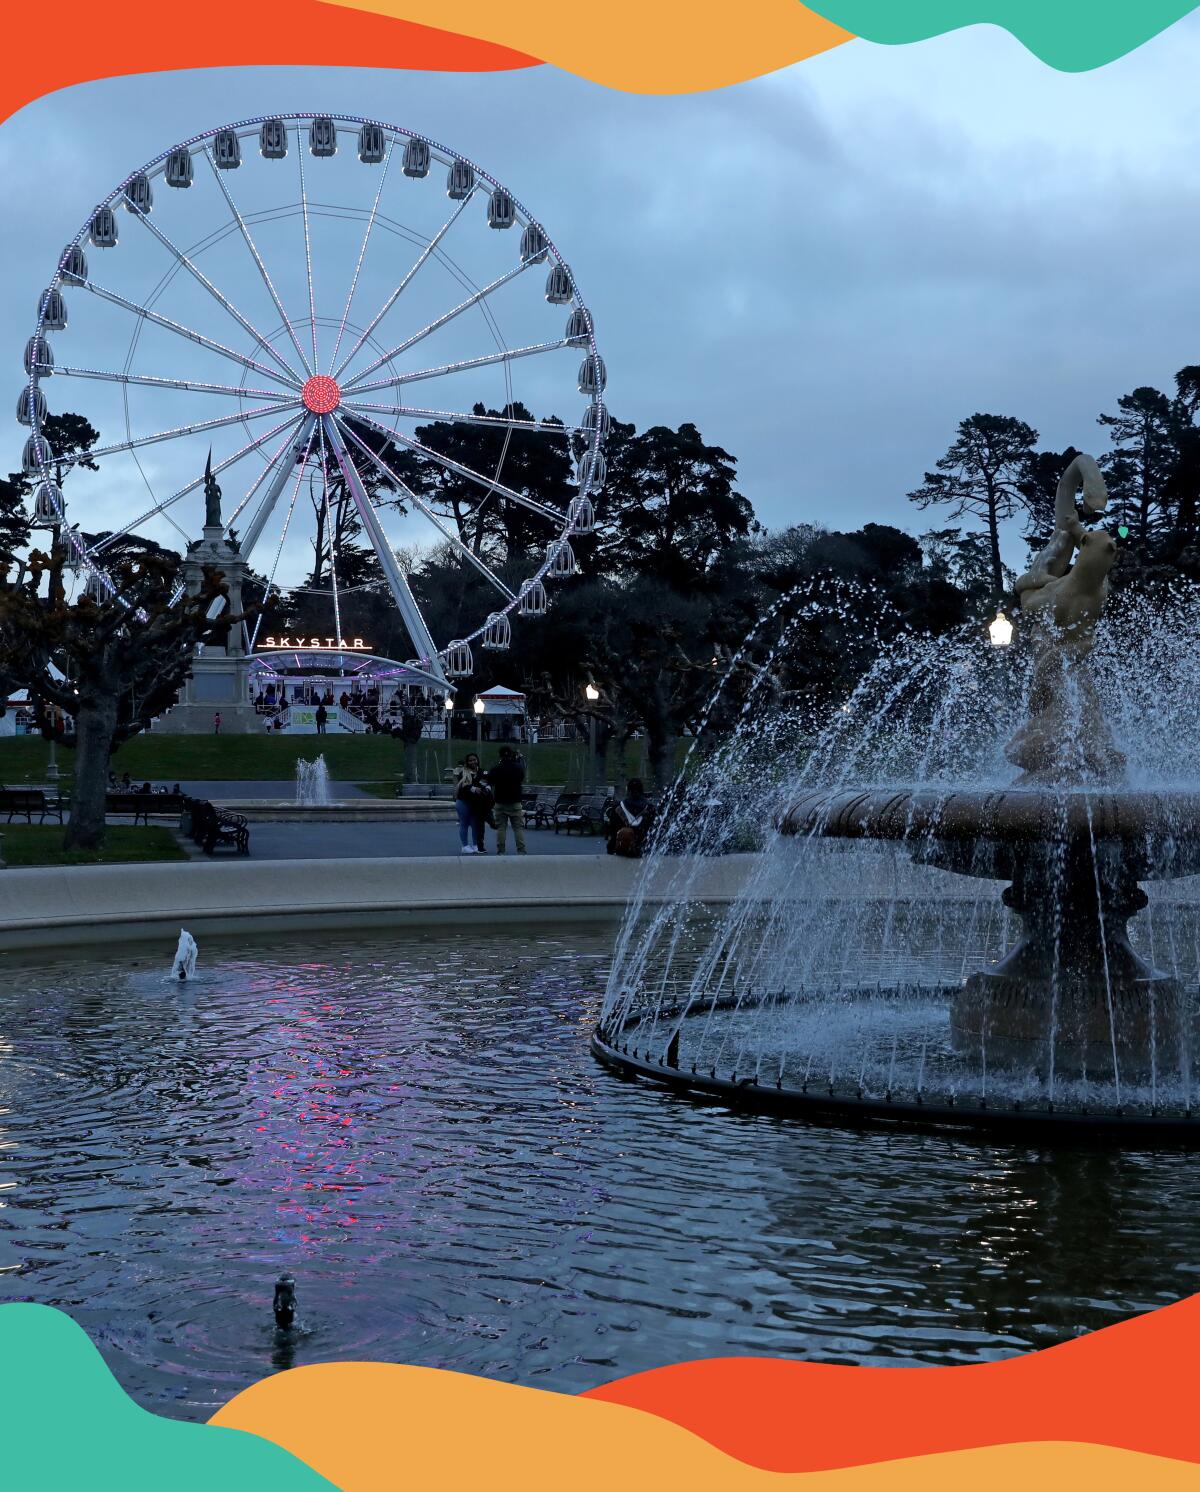 The SkyStar Observation Wheel in San Francisco's Golden Gate Park, with a large fountain in the foreground